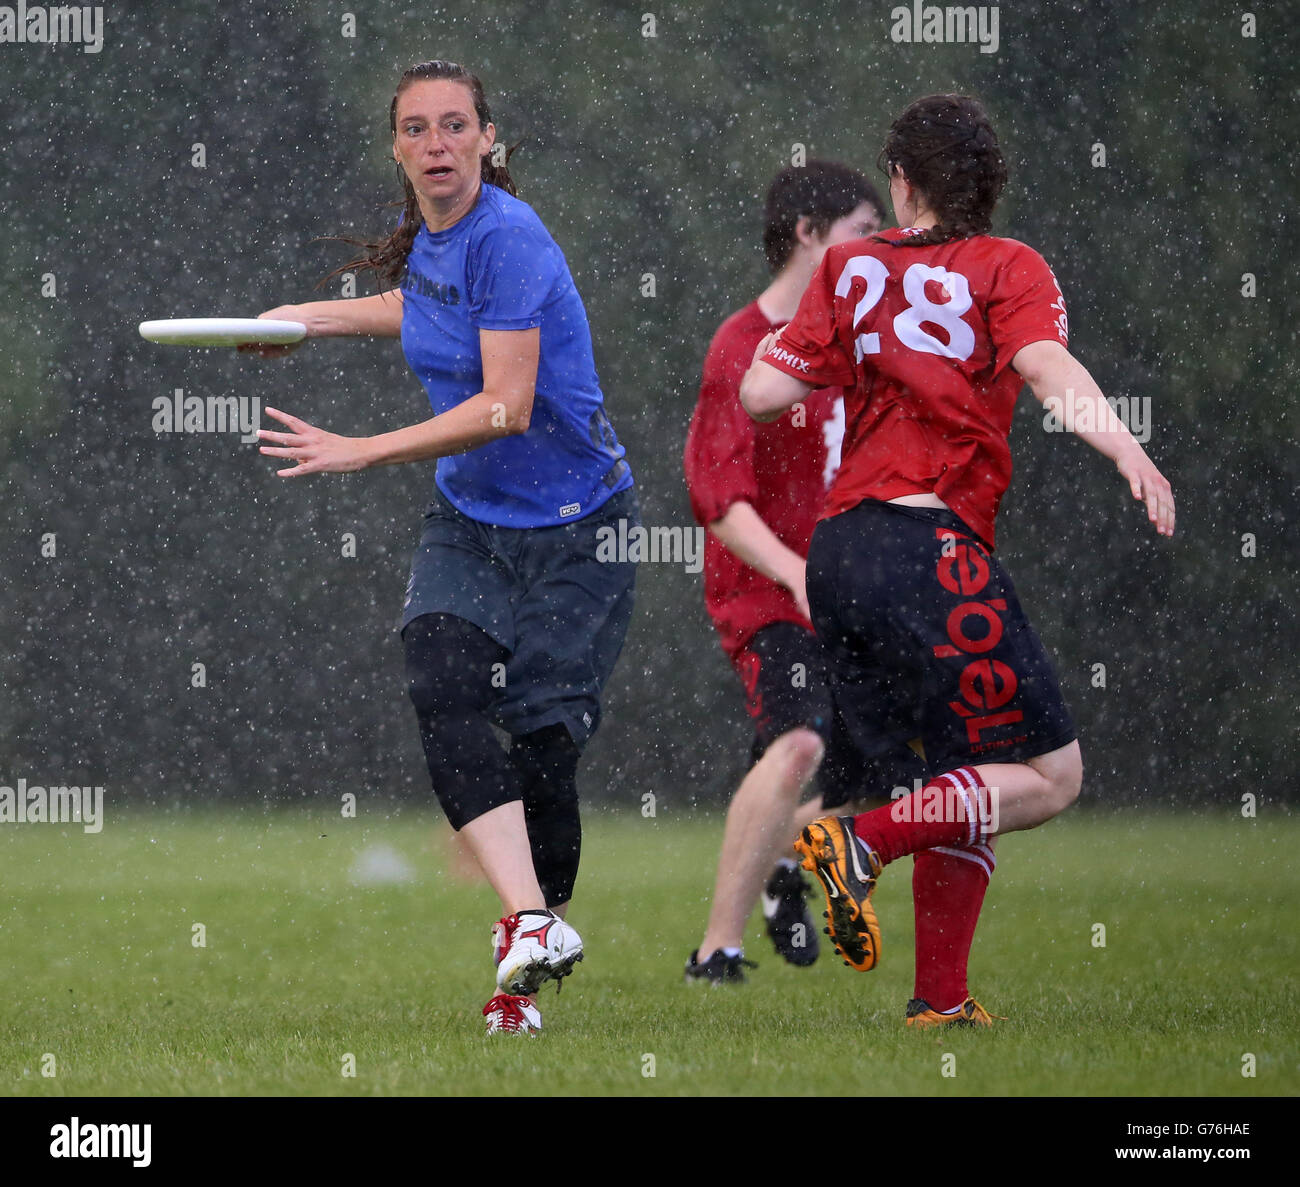 STANDALONE Photo. Louise Dyring Mbae of the Copenhagen Spinners against the Rebel Ultimate team from Ireland, during the the inaugural outdoor mixed Golden Keg Ultimate Frisbee Tournament at John Paul II Park in Dublin. Stock Photo